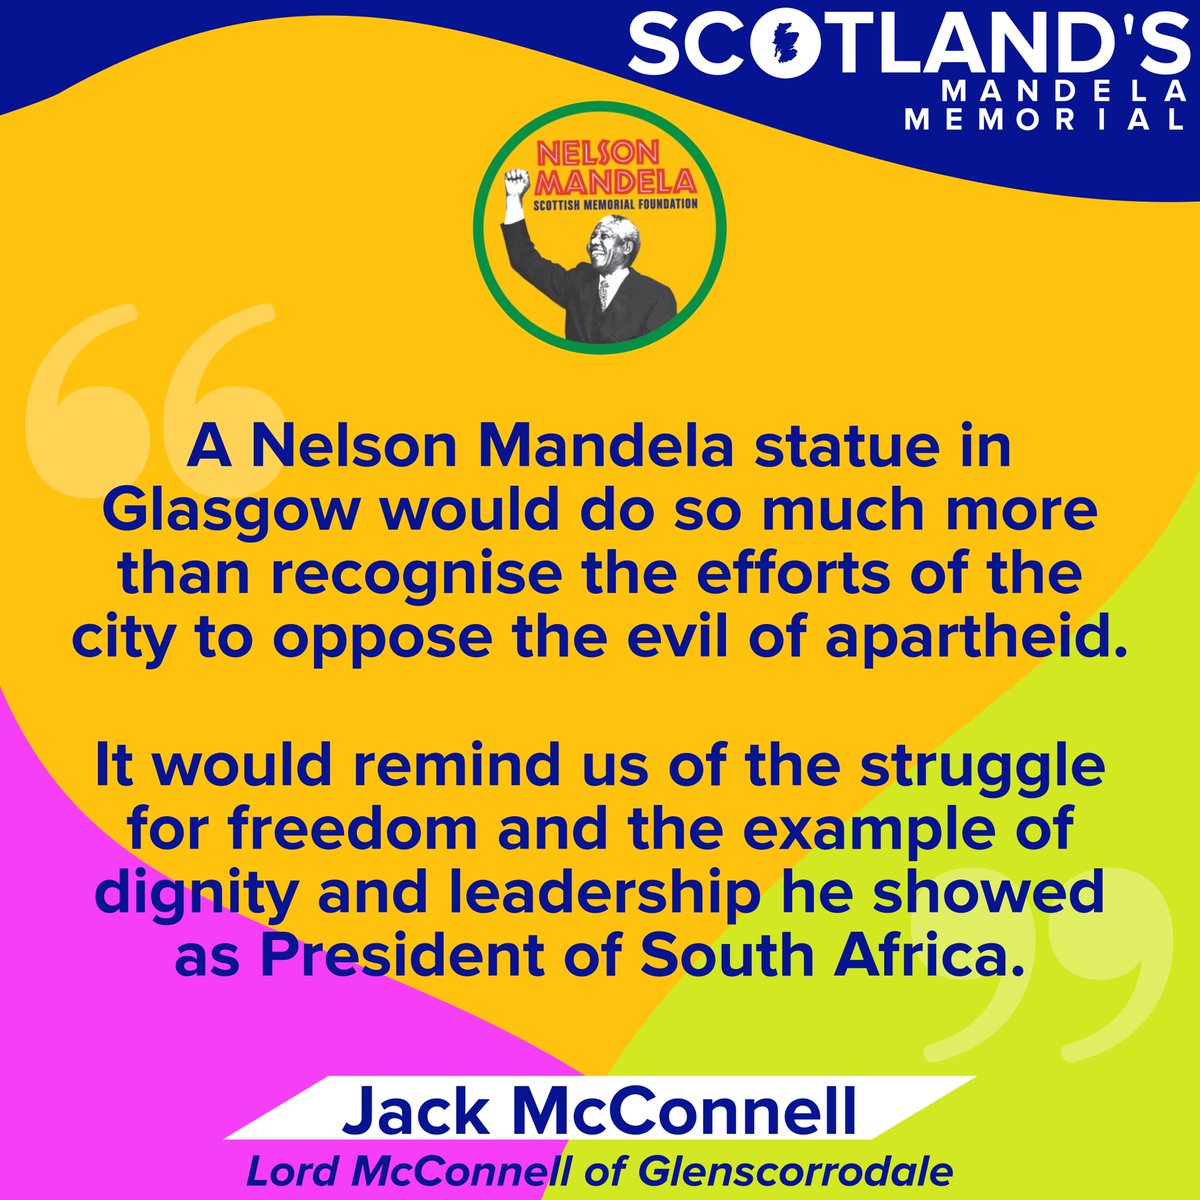 This is the last weekend of our Crowdfunder Appeal, lets make it really count! Scotland's Mandela Statue - Make It Happen! Final messages of support are still coming in like this one from Lord Jack McConnell. Please donate now at bit.ly/MandelaCrowd @LordMcConnell